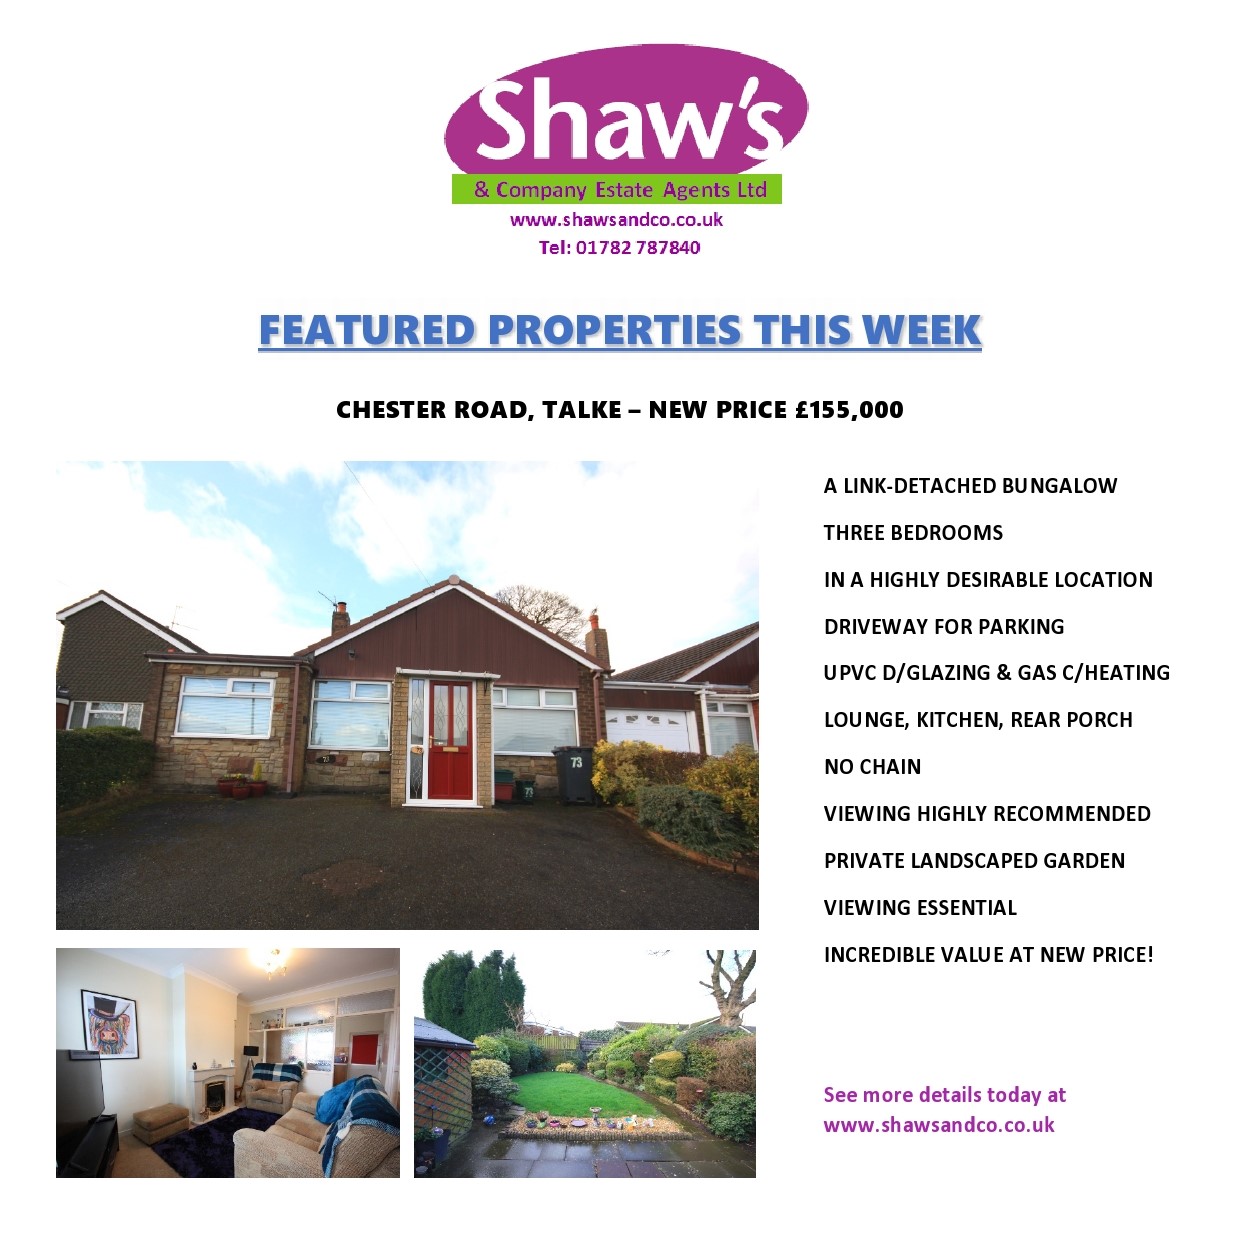 NEW OTM & FEATURED PROPERTIES THIS WEEK!